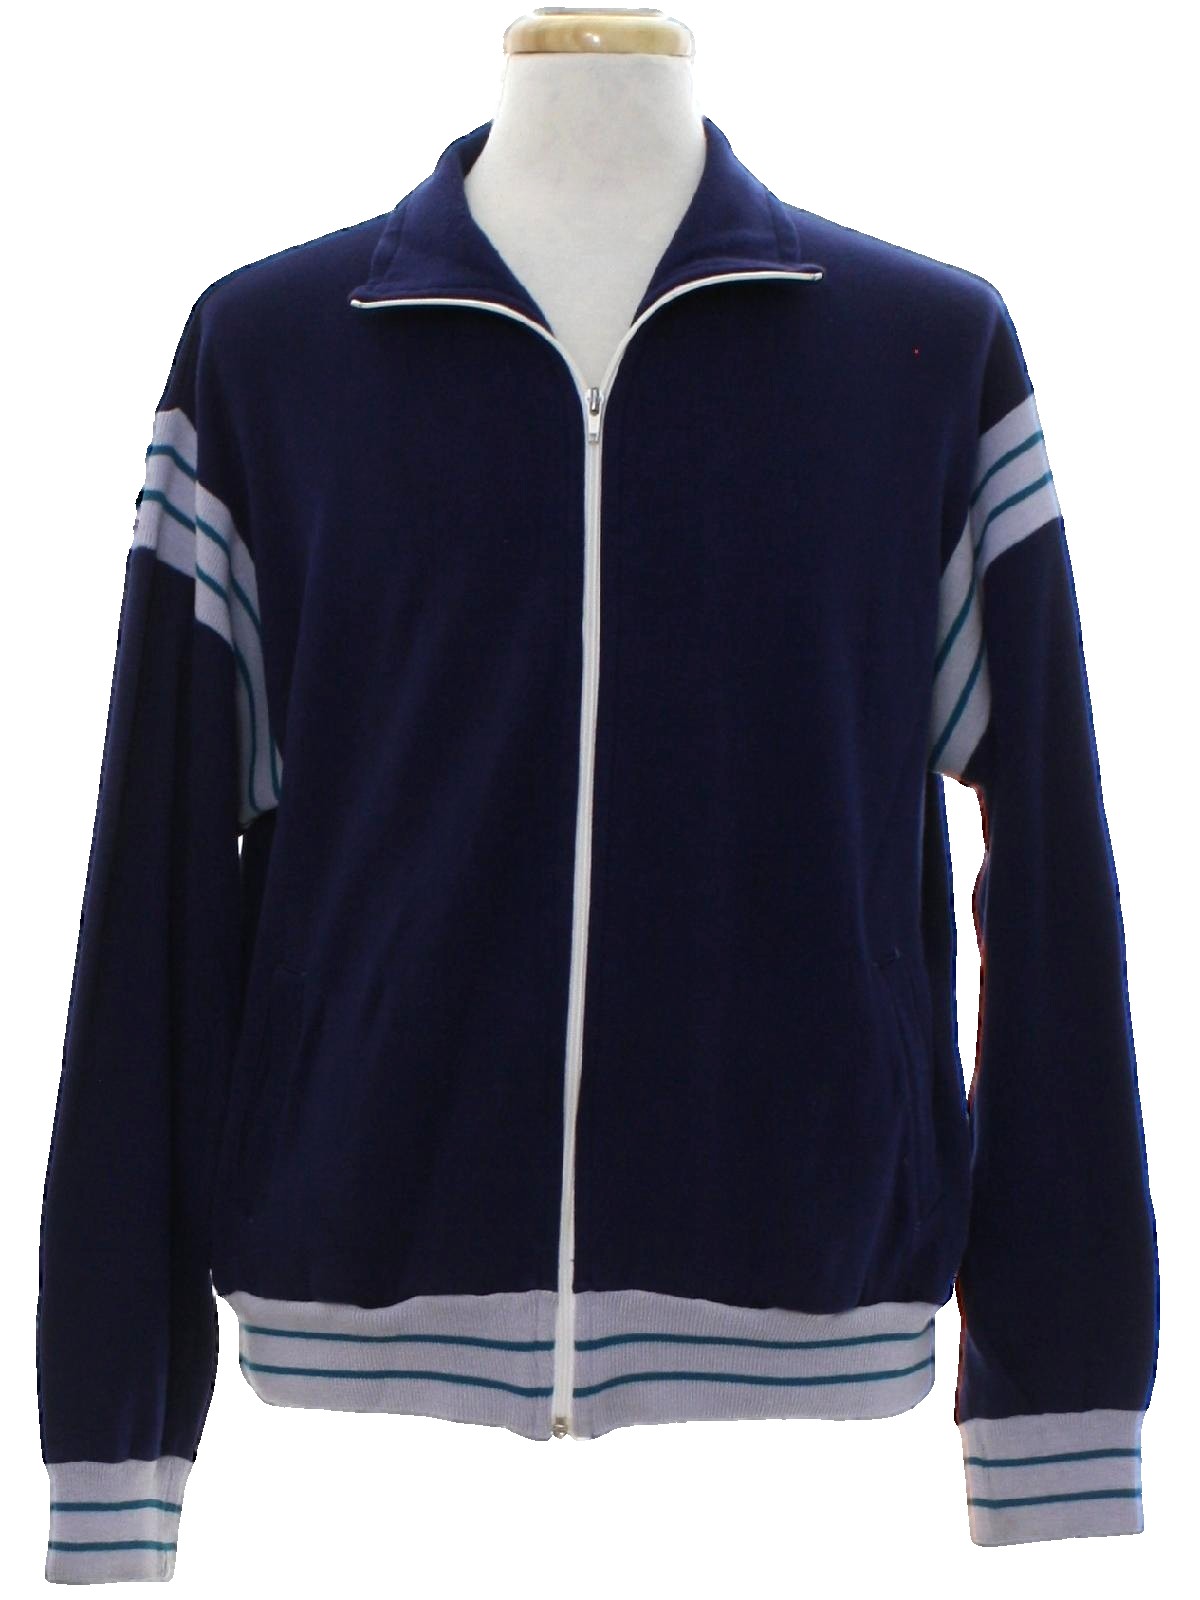 80's Gear for Sports Jacket: 80s -Gear for Sports- Mens midnight blue ...